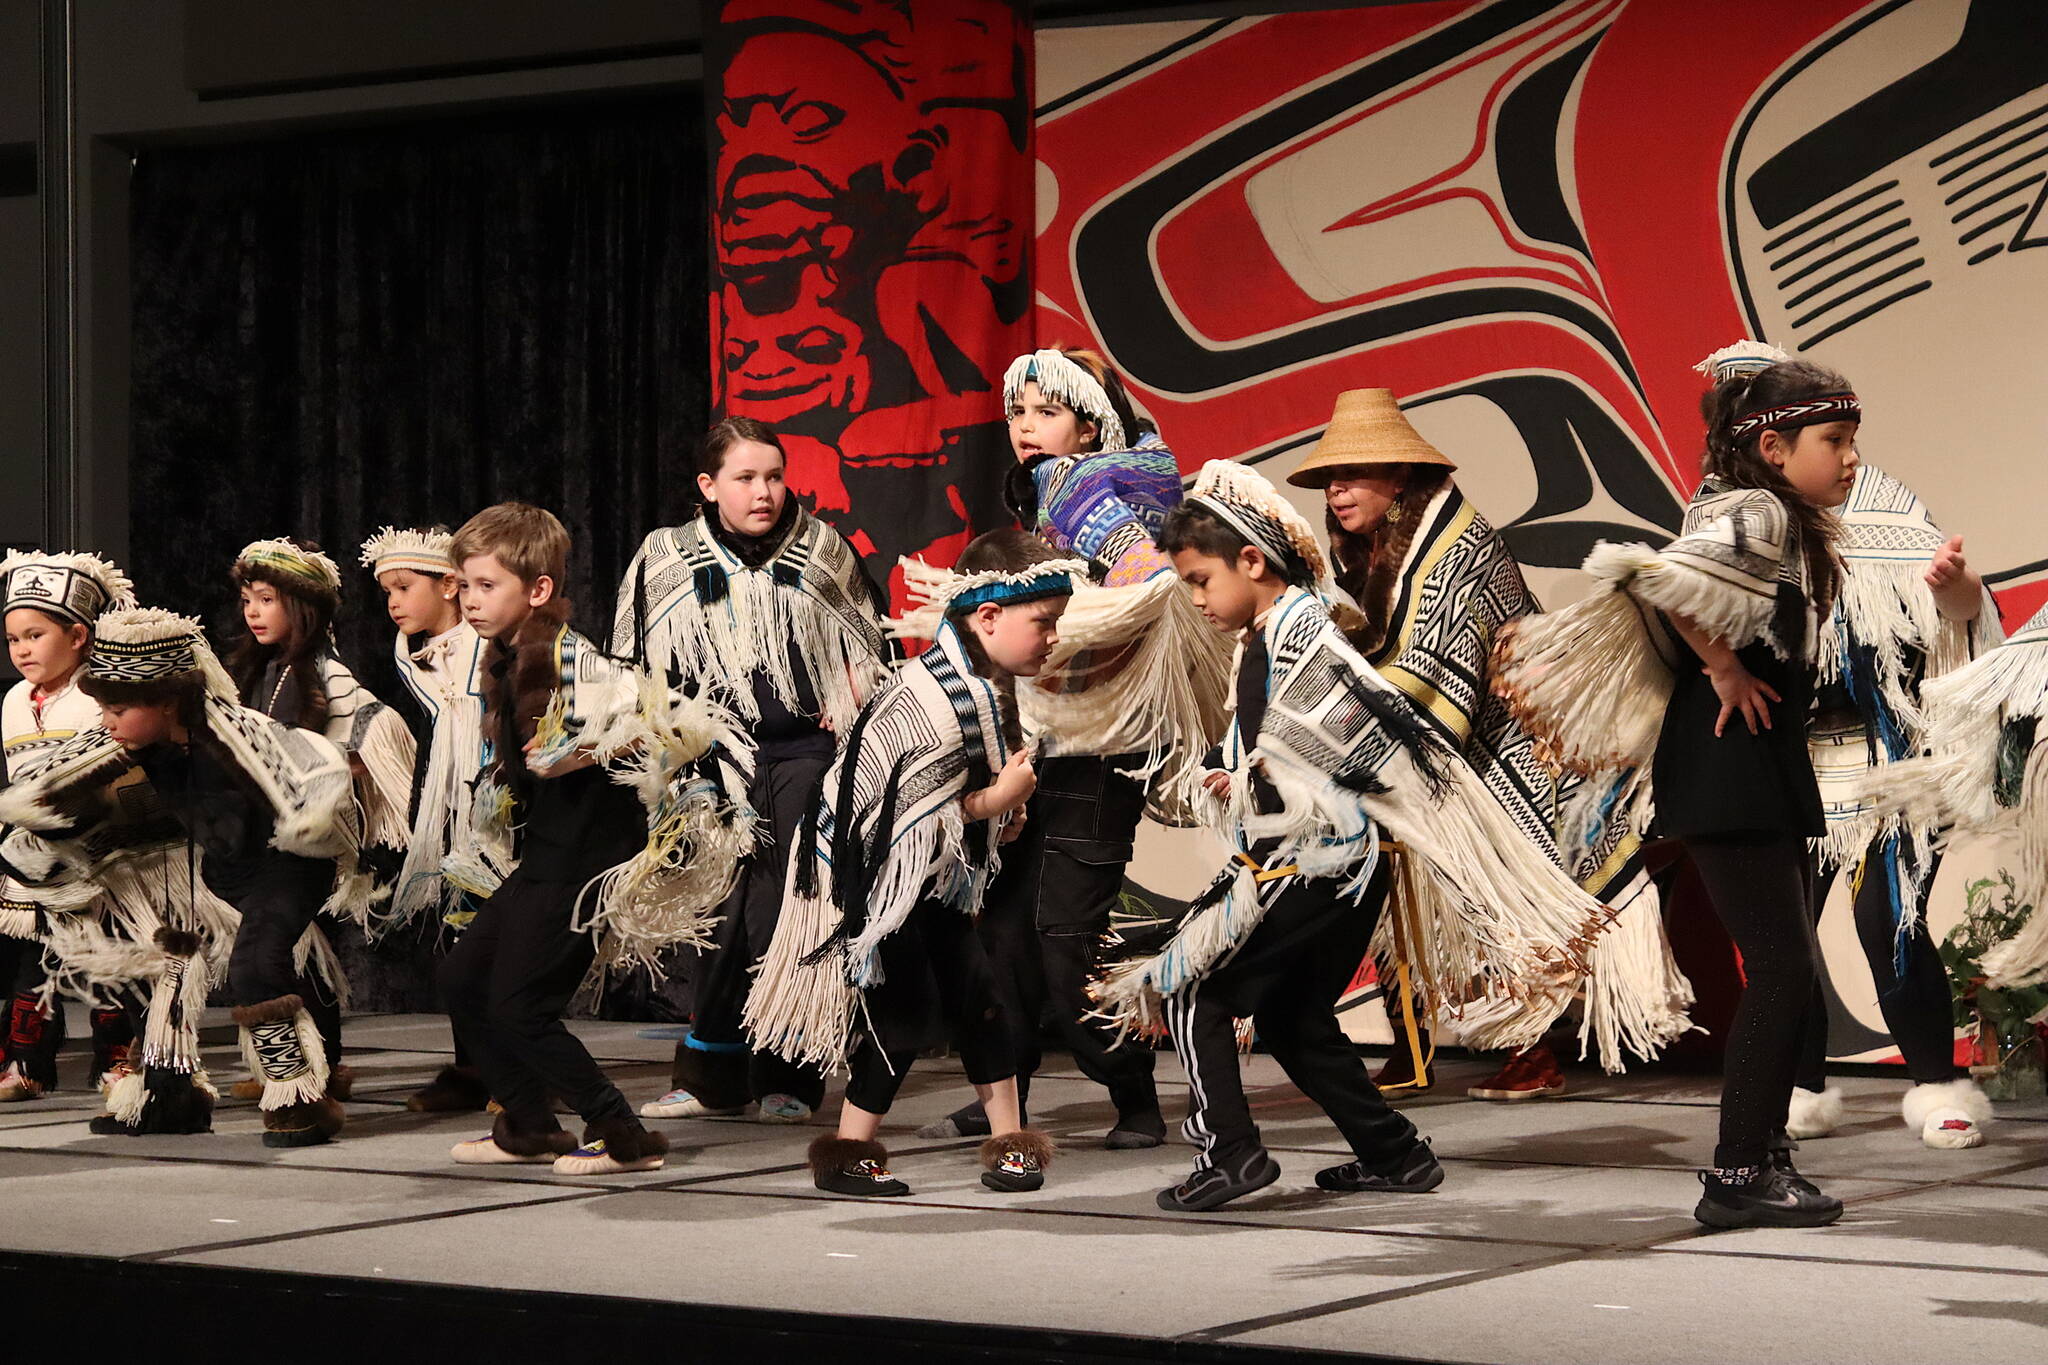 About 20 youths dance in Ravenstail robes during a ceremony at Centennial Hall on Tuesday evening featuring the history of the ceremonial regalia. (Mark Sabbatini / Juneau Empire)